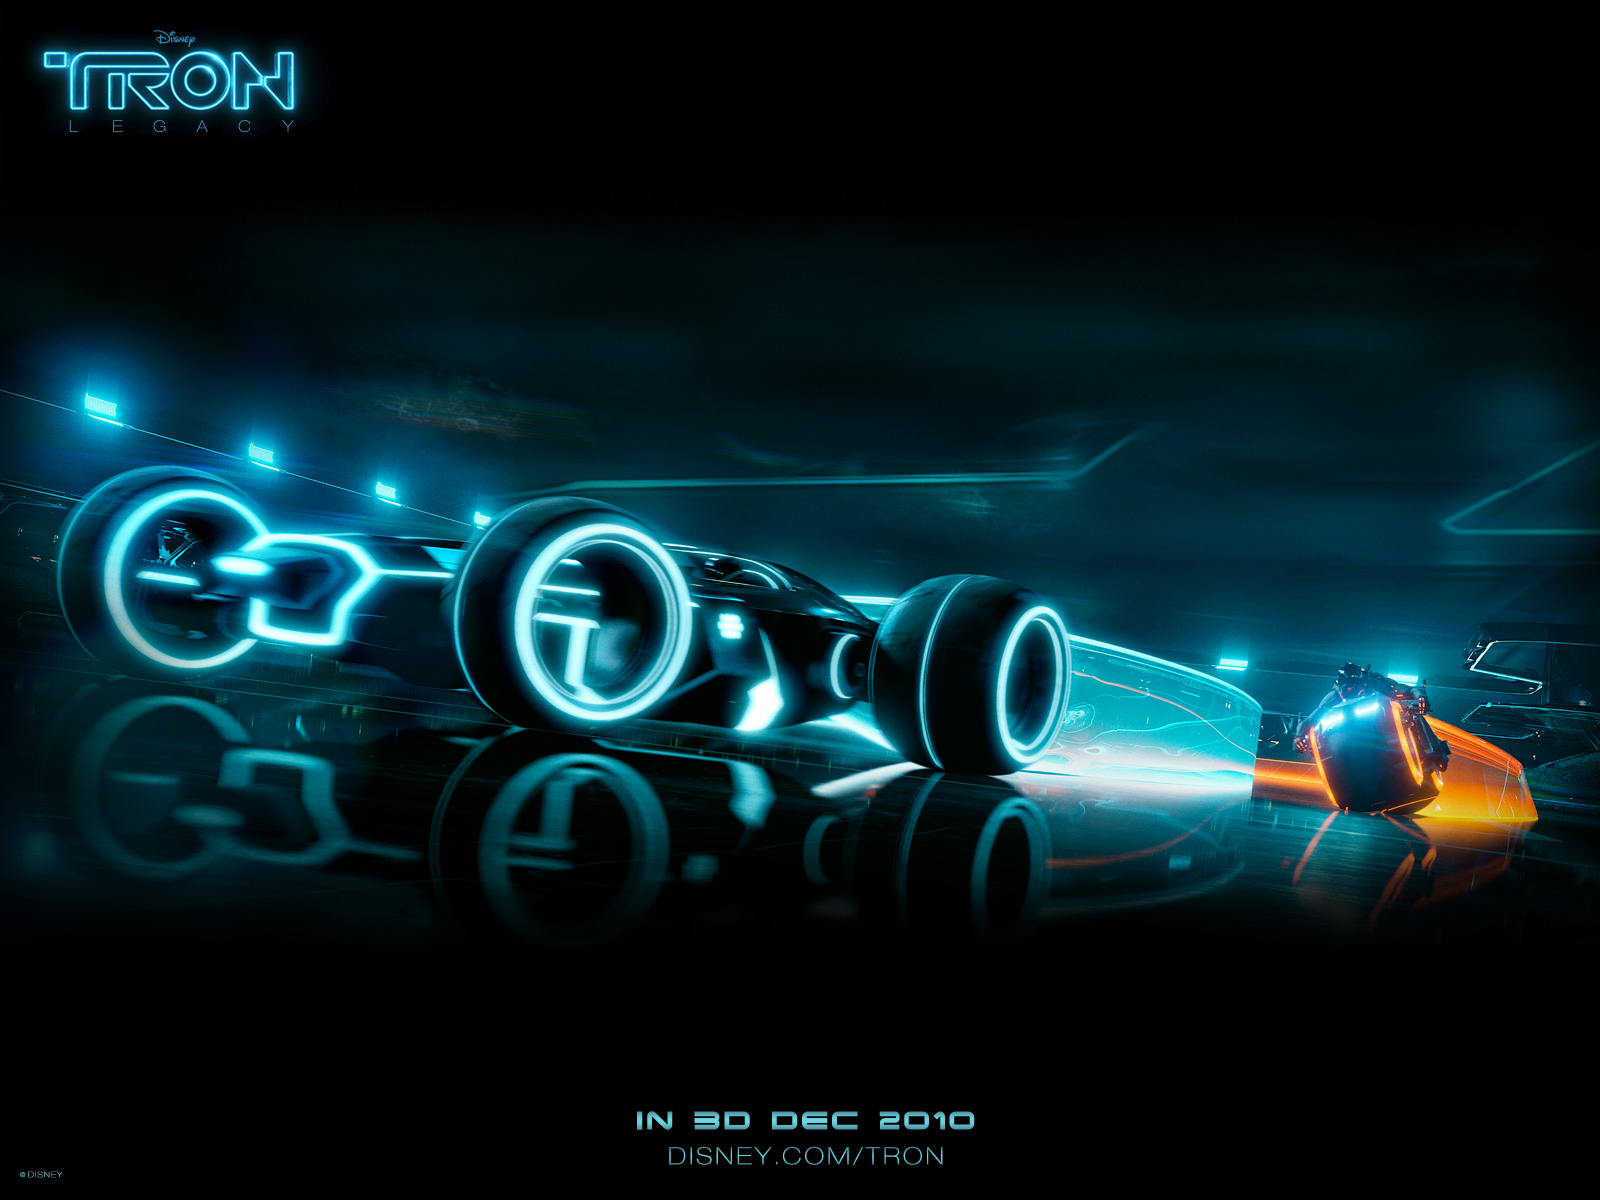  Cycle and Car Race from Disneys Tron Legacy Desktop Wallpaper 1600x1200